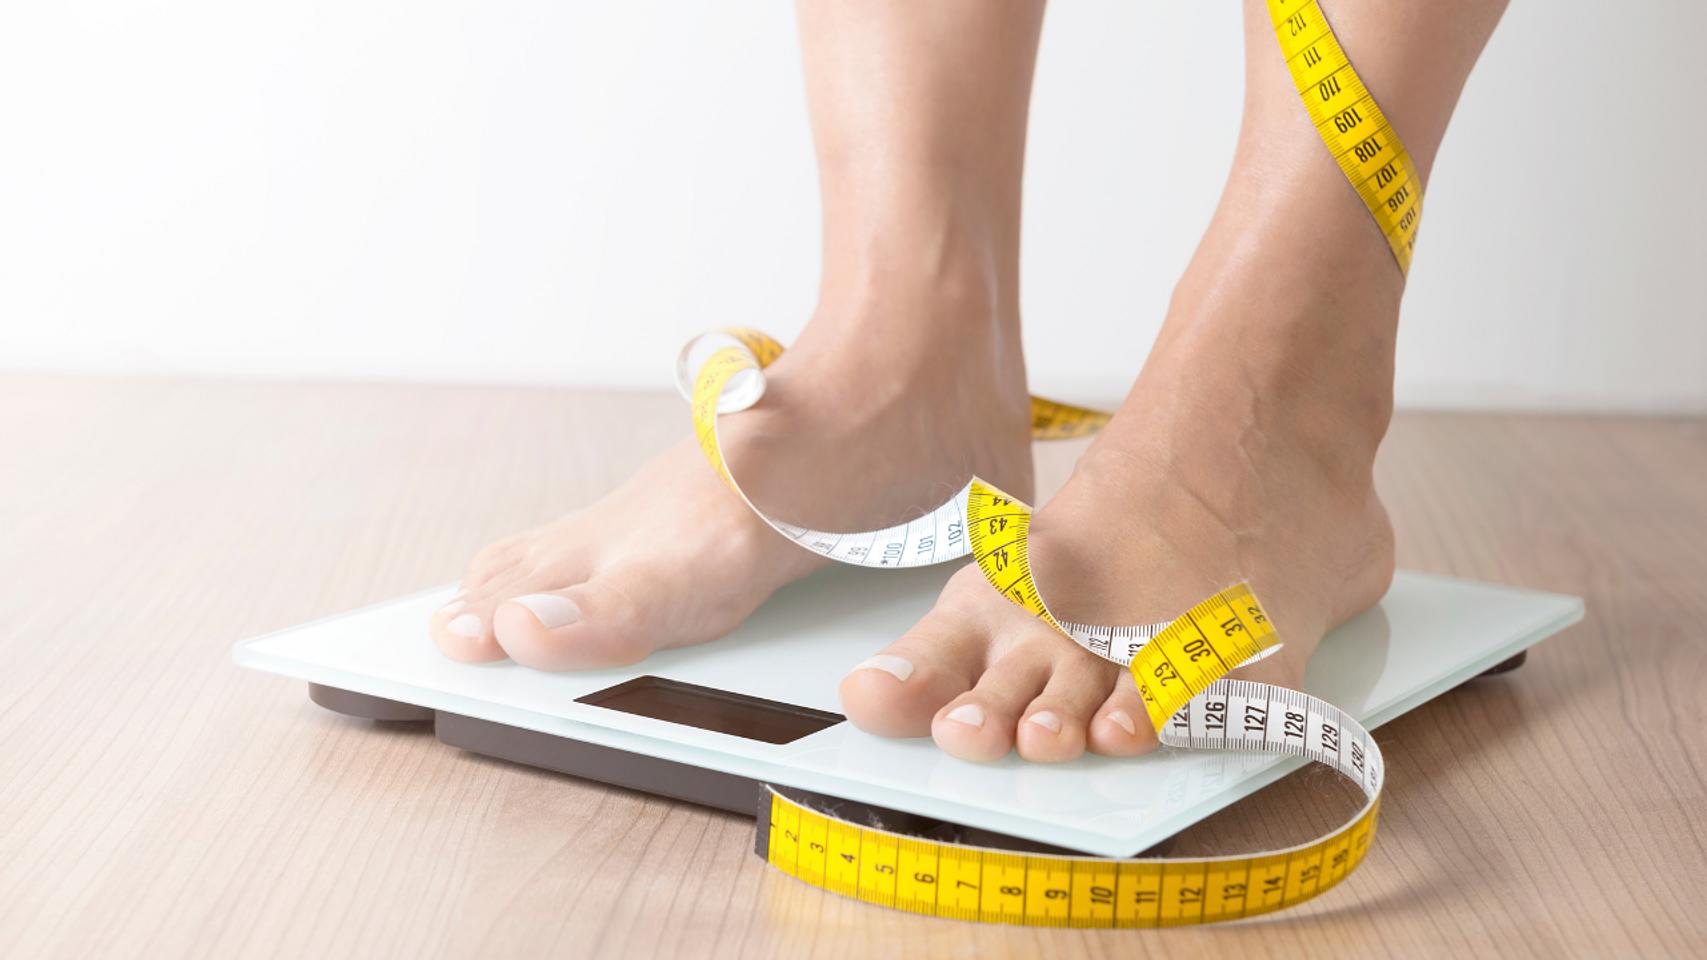 Six Ways The Scale Doesn’t Always Tell The Full Story